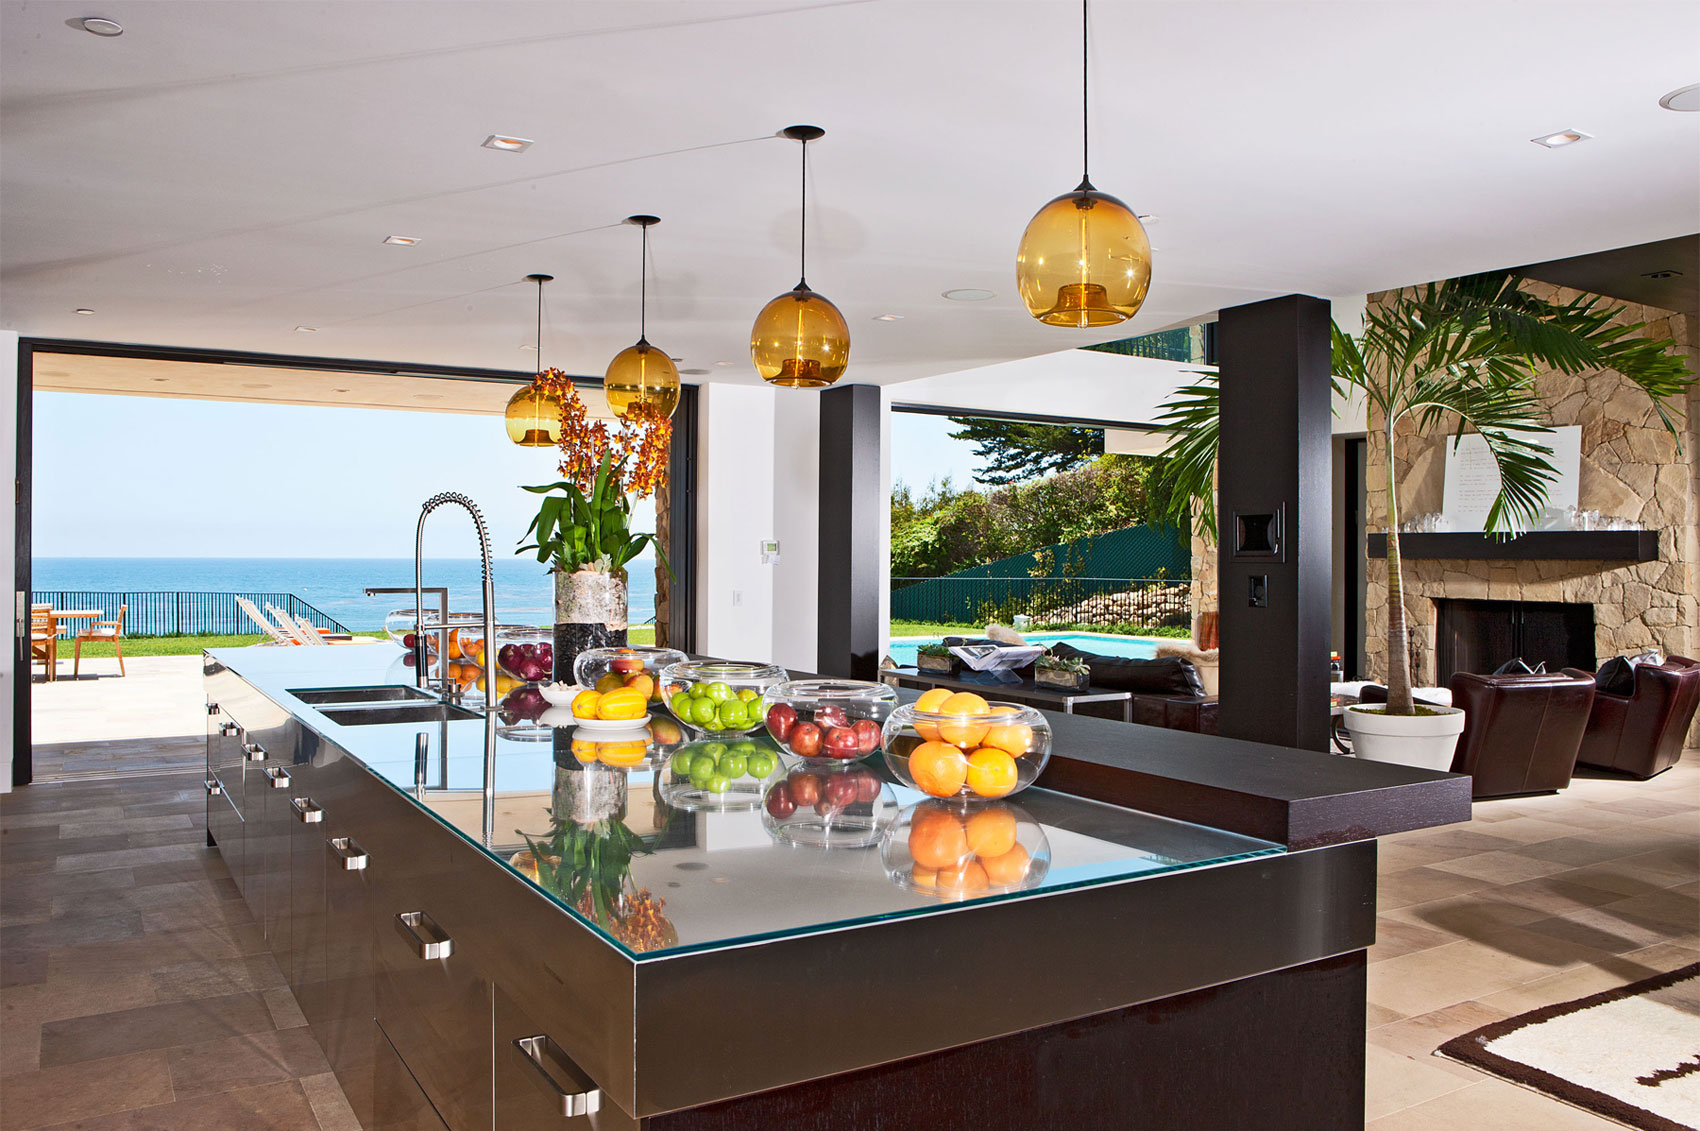 Home Ideas Inspiring Kitchen Design For Malibu Beach House Design For Sale With Yellow Shade Track Pendant Lamp And Big Kitchen Island Also Amazing Urban Style Architecture Inspiring Pictur Architecture